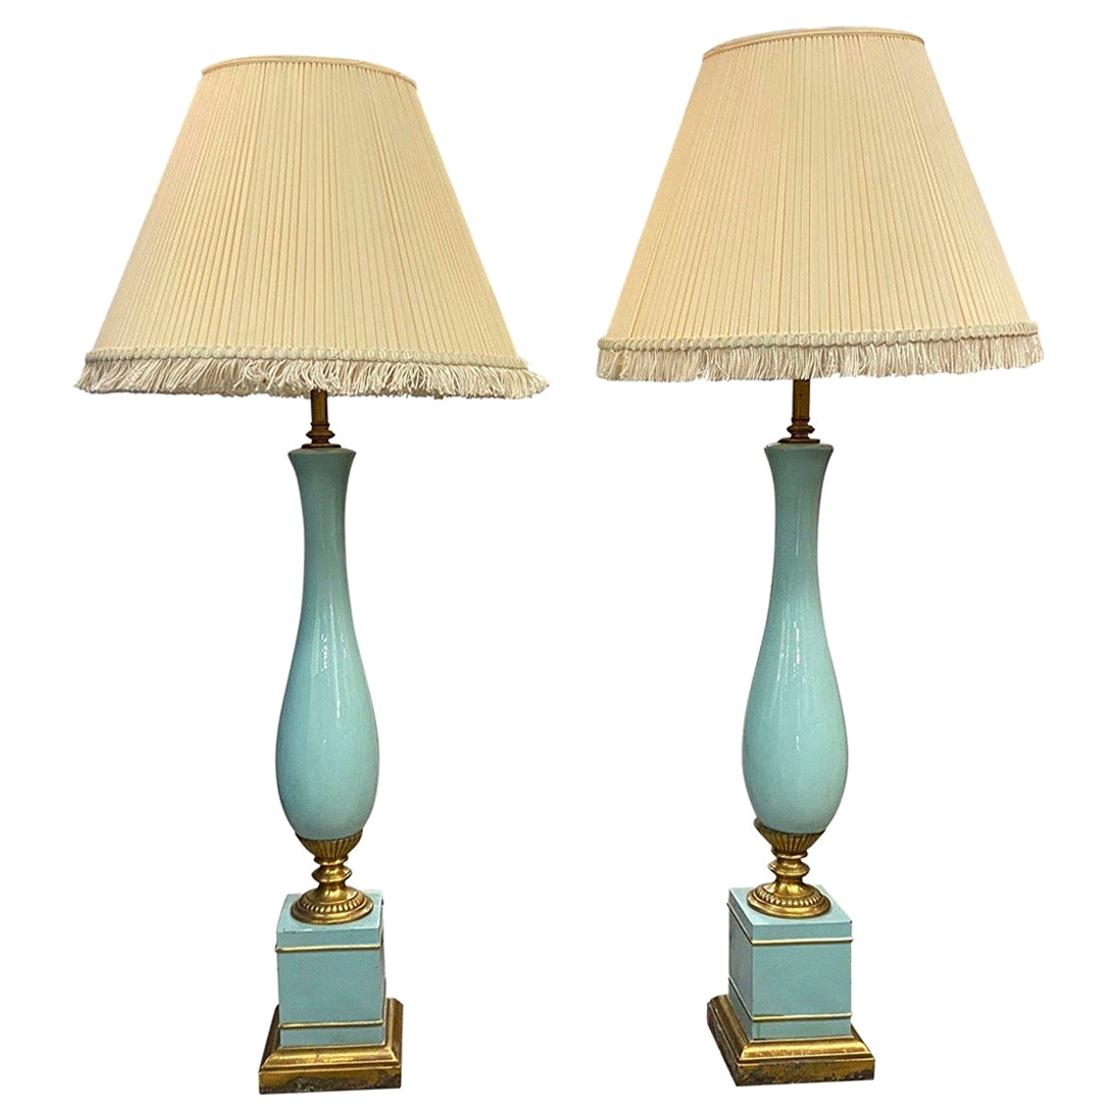 Monumental Pair of French Mid-Century Modern 1950s Table Lamps